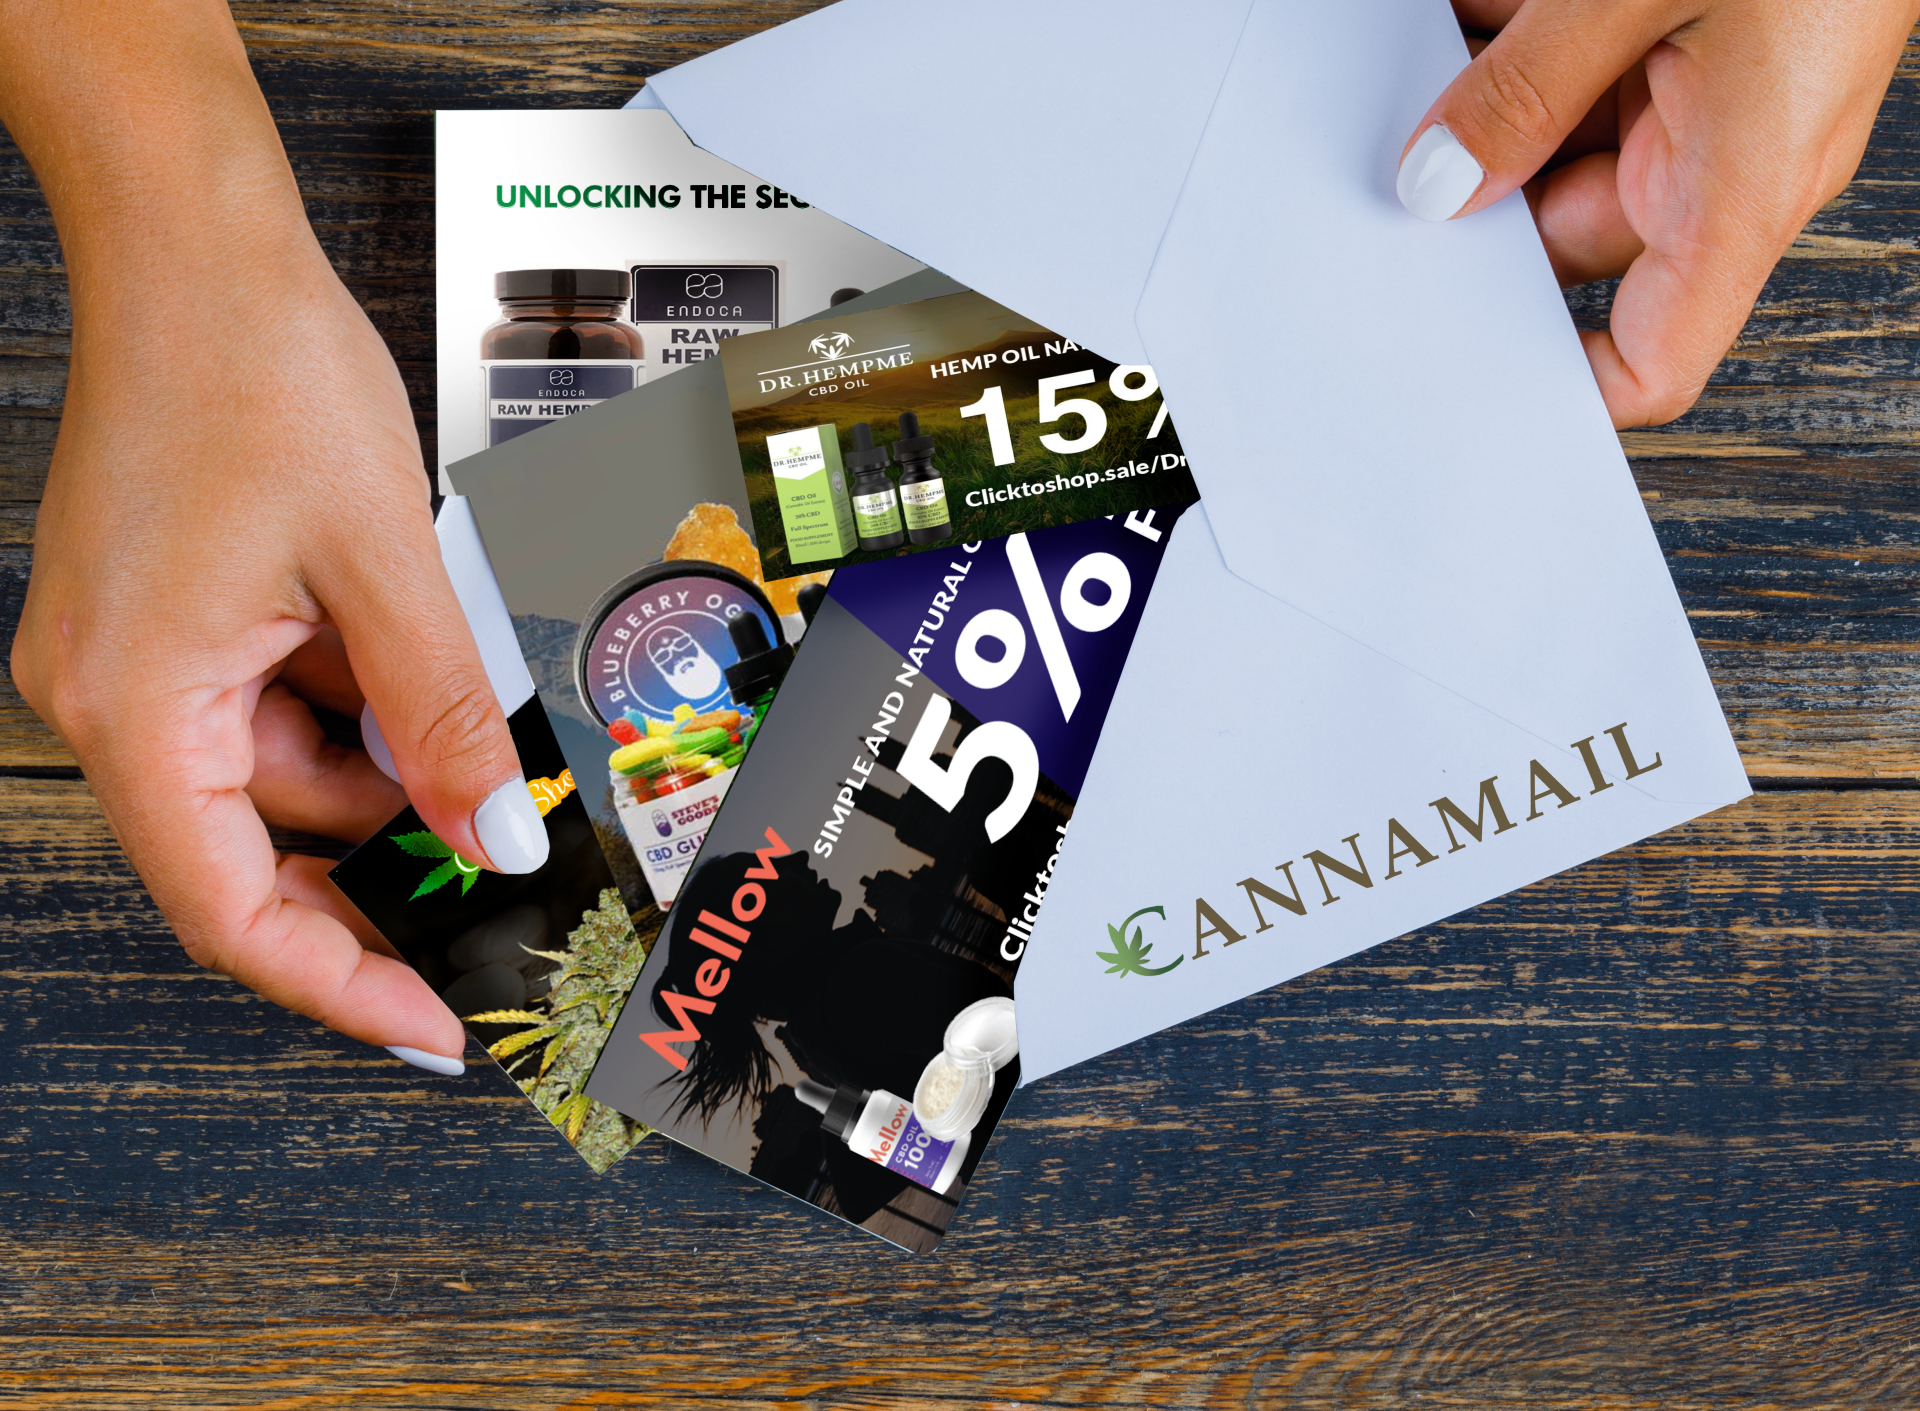 Direct mail is one of the most effective marketing tools available, even though it's been used for decades. It's also a great fit for advertising your cannabis dispensary to  create awareness, drive traffic to your website, and promote conversation among your recipients